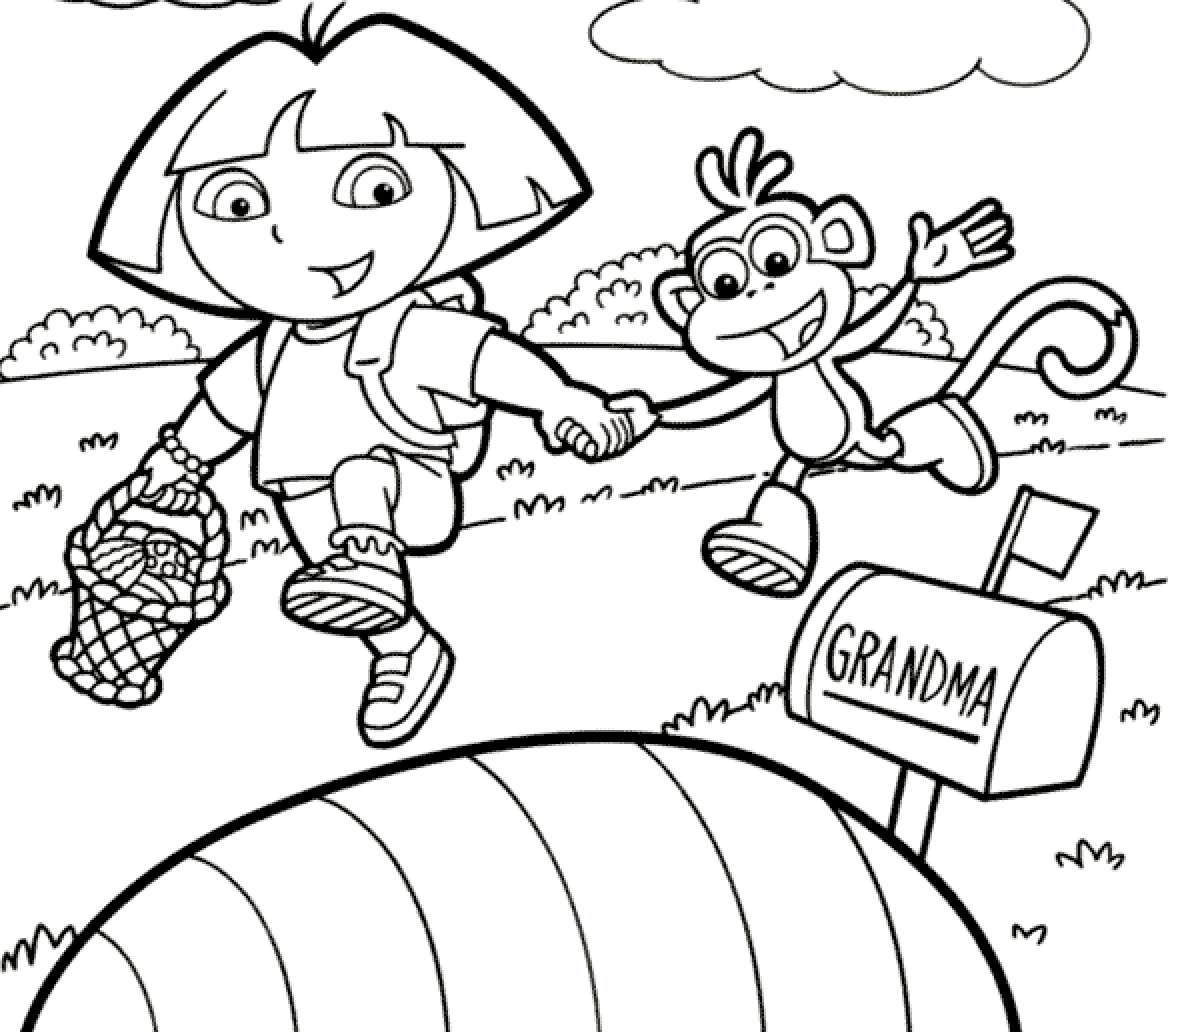 Dora And Boots Coloring Page Free wallpaper